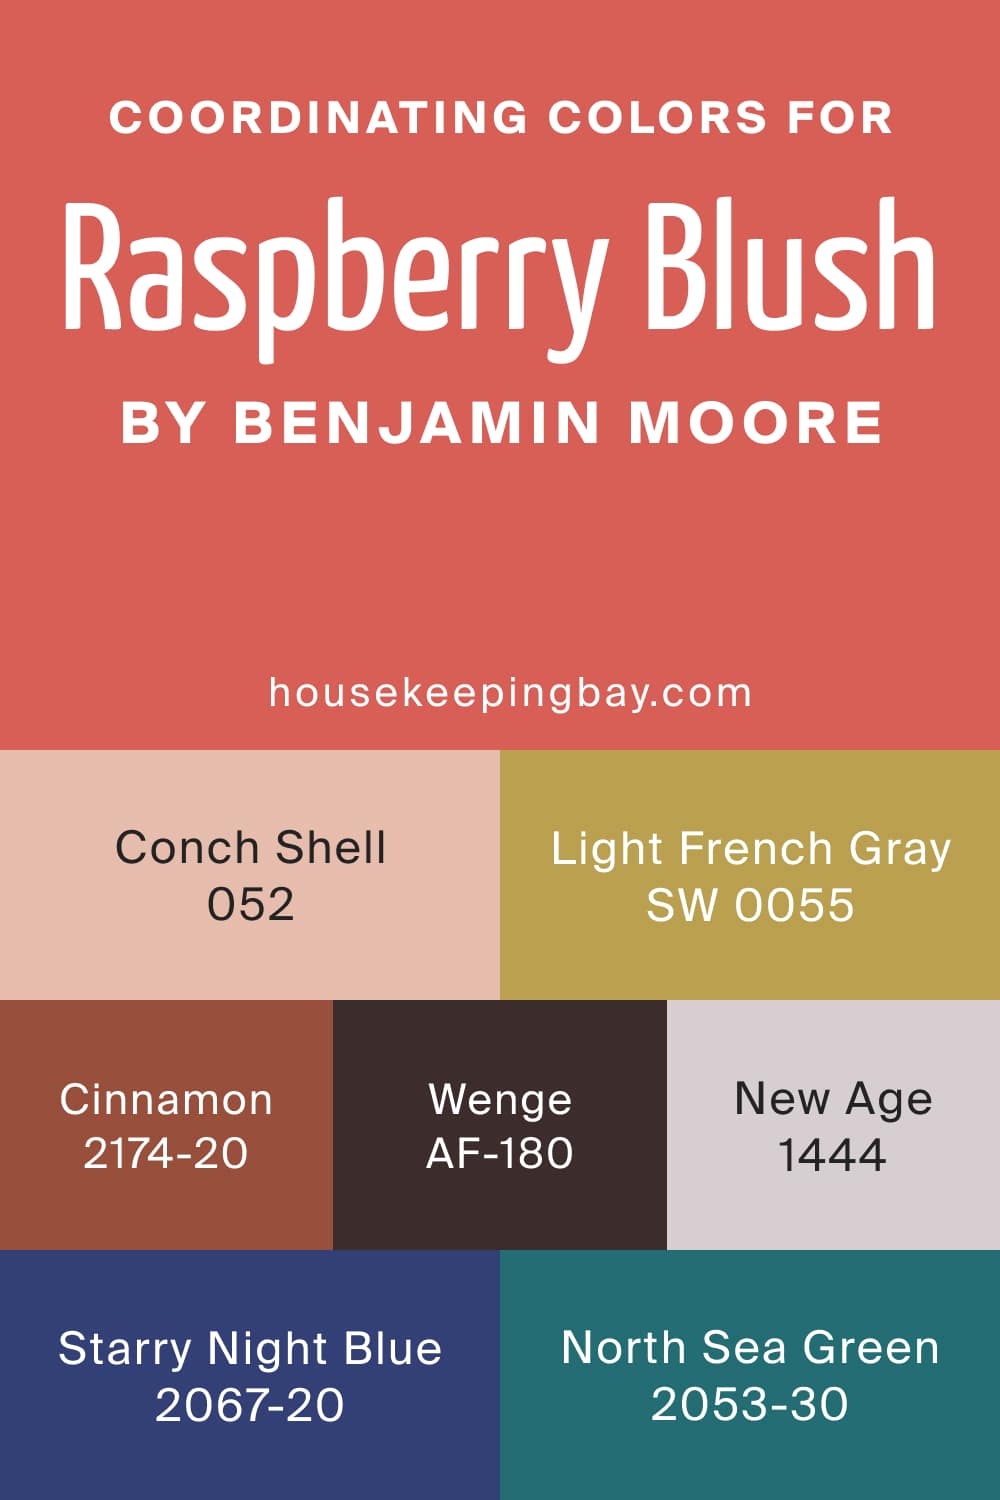 Coordinating Colors for Raspberry Blush 2008 30 by Benjamin Moore